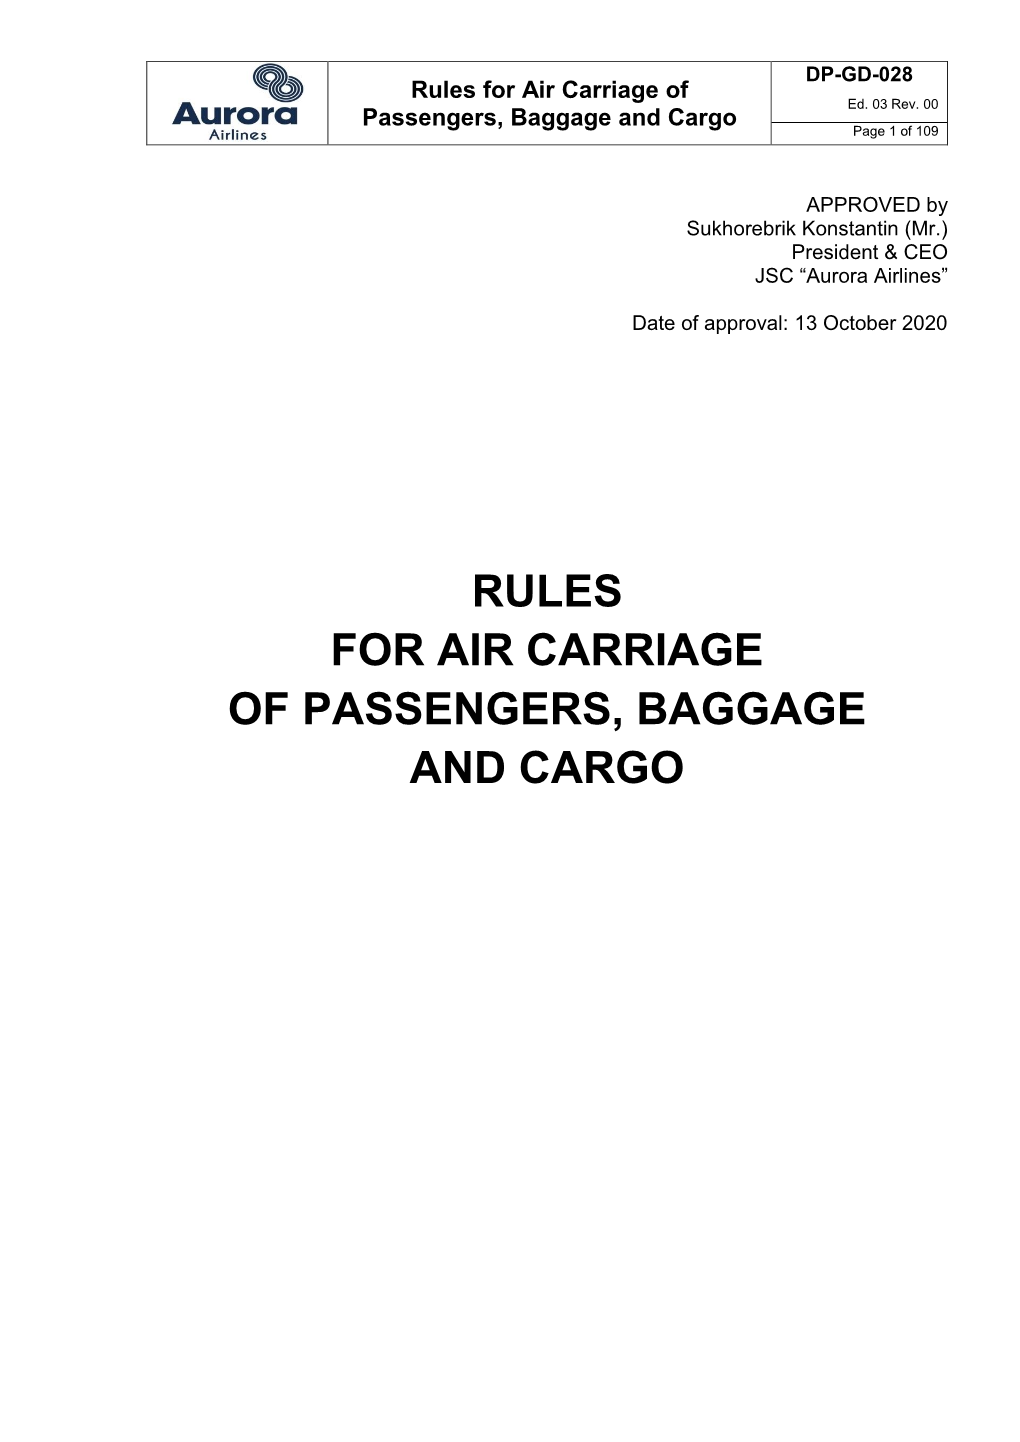 RULES for AIR CARRIAGE of PASSENGERS, BAGGAGE and CARGO DP-GD-028 Rules for Air Carriage of Ed